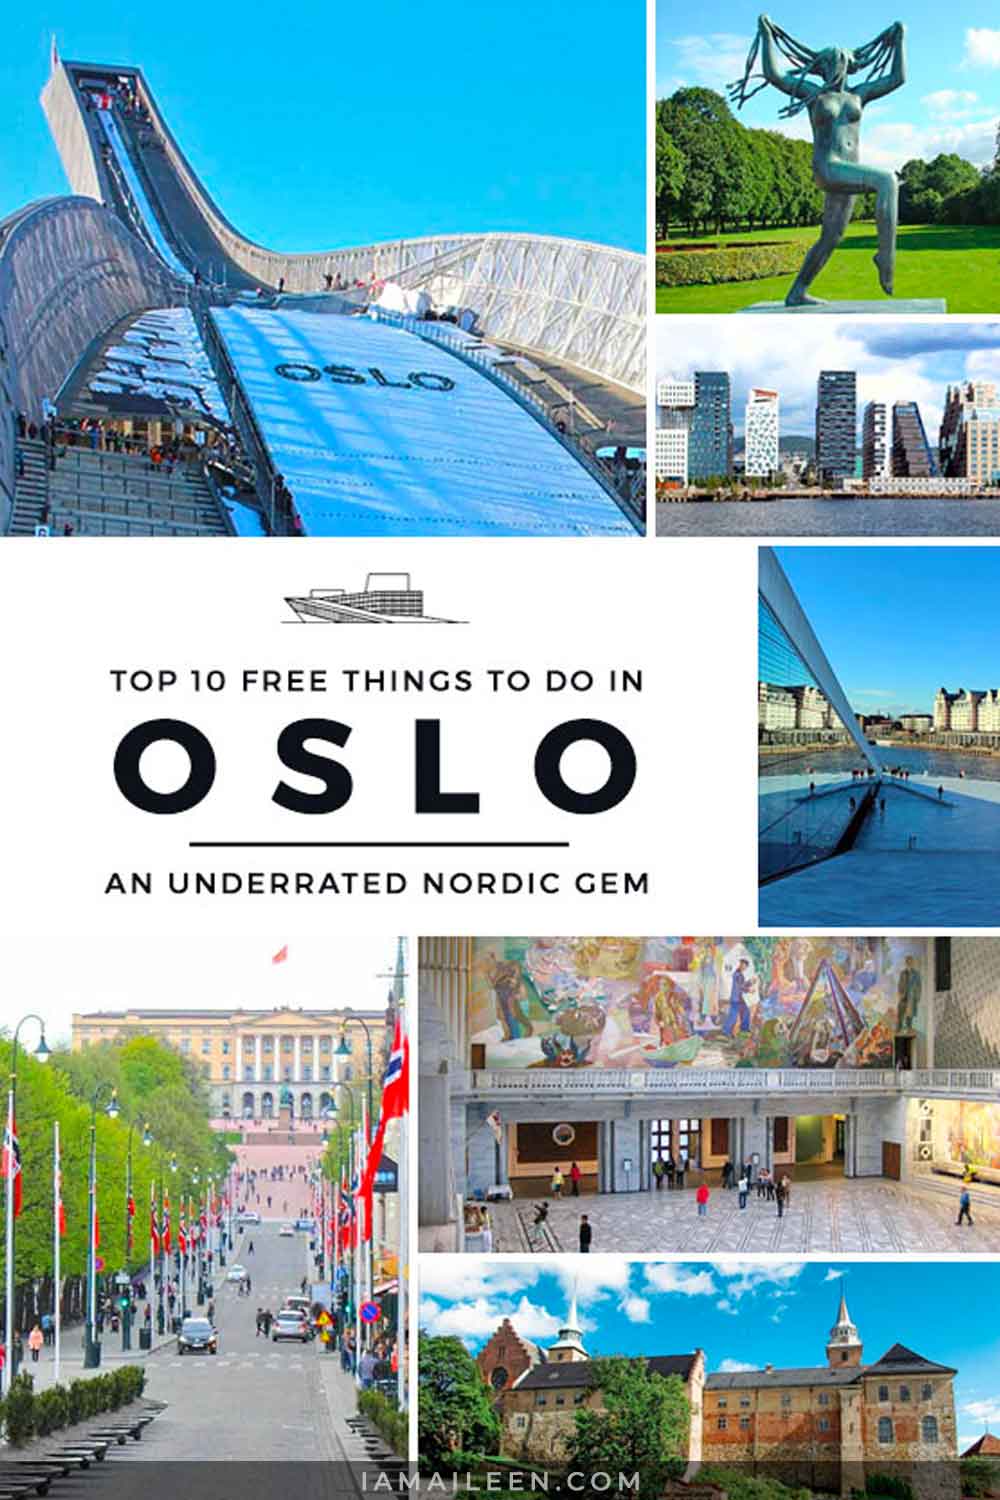 Top 10 FREE Things to Do in Oslo, an Underrated Nordic Gem (Norway)